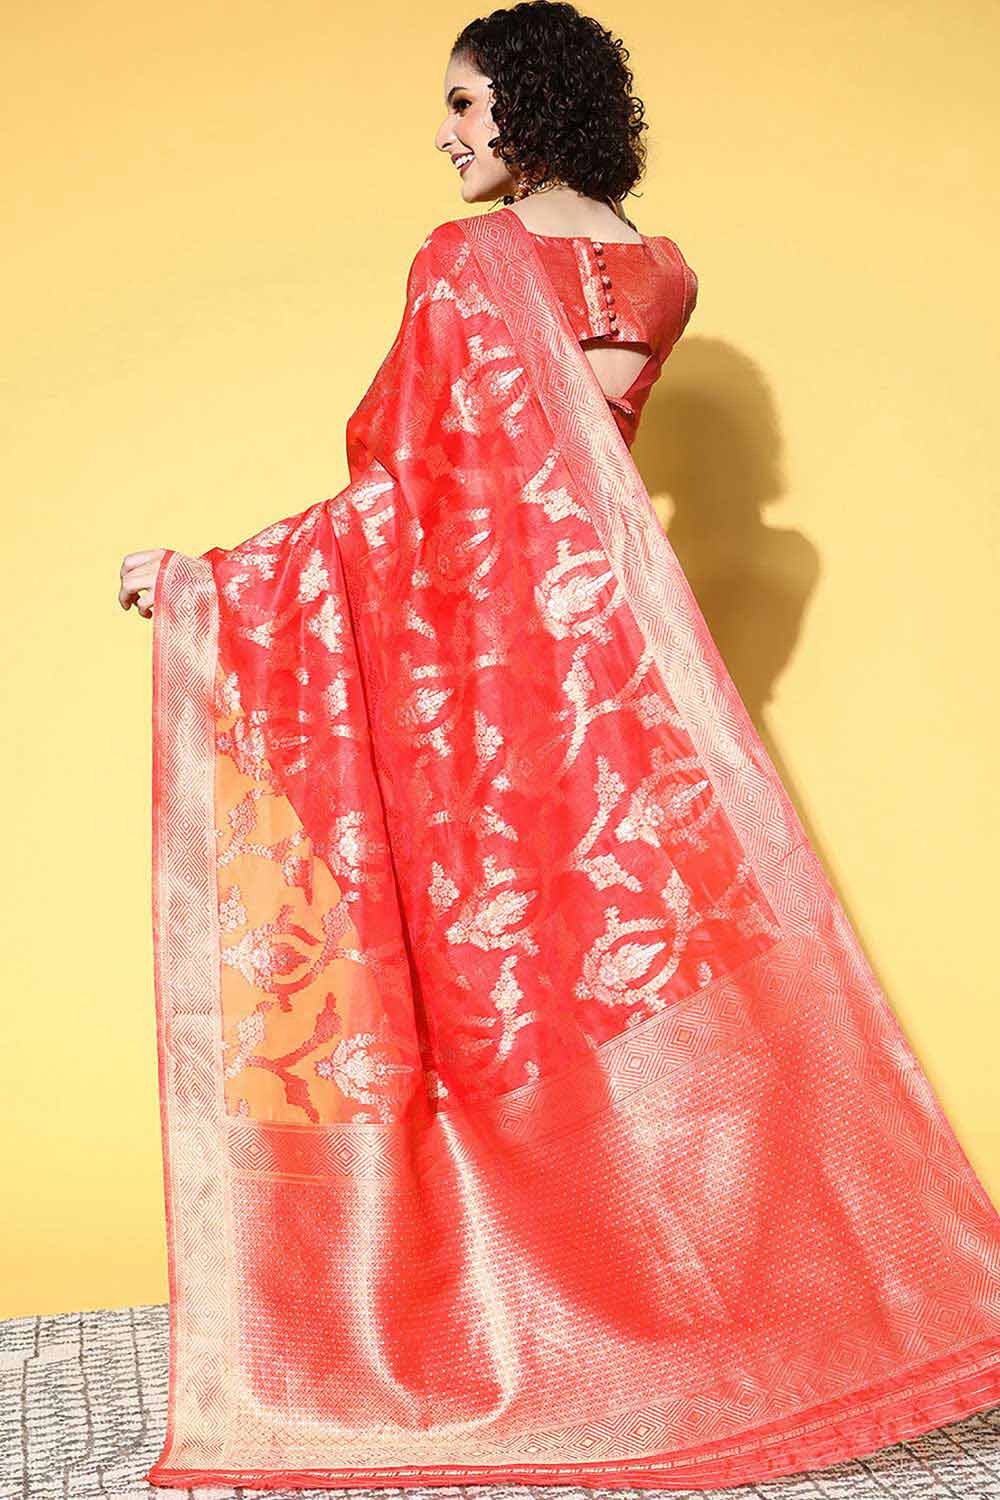 Shop Deana Red Organza Ethnic Motif Woven Design One Minute Saree at best offer at our  Store - One Minute Saree